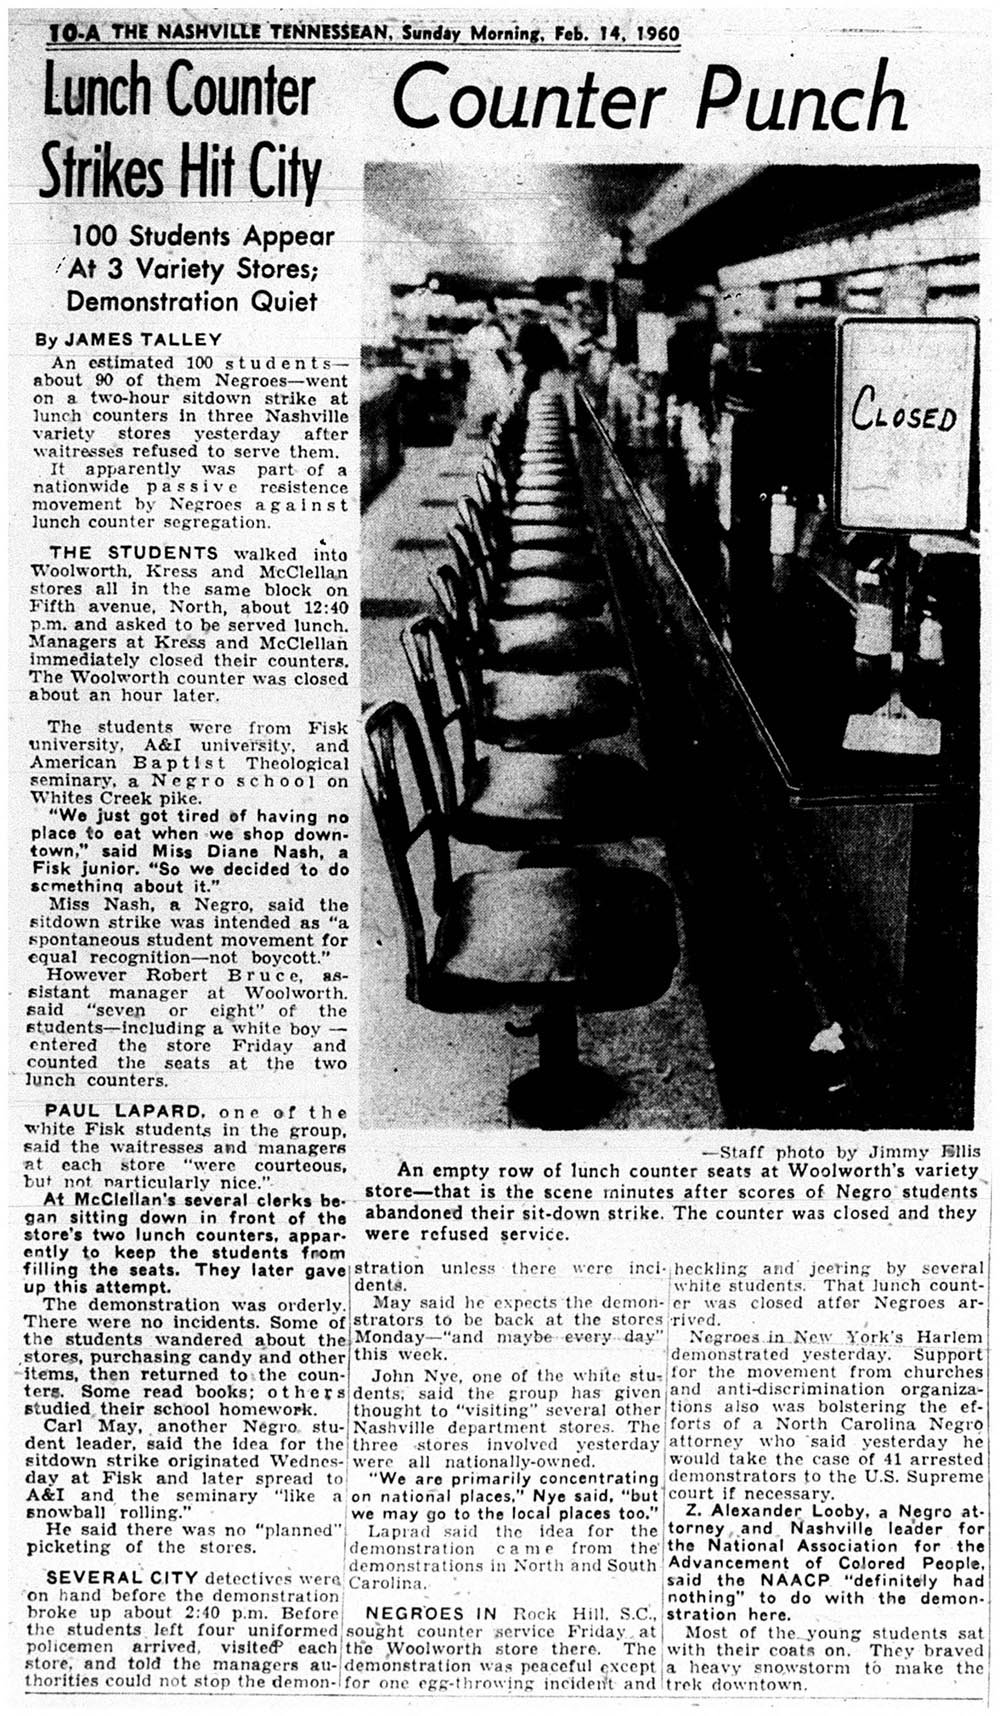 Newspaper coverage of Nashville’s lunch counter sit-ins, 1960